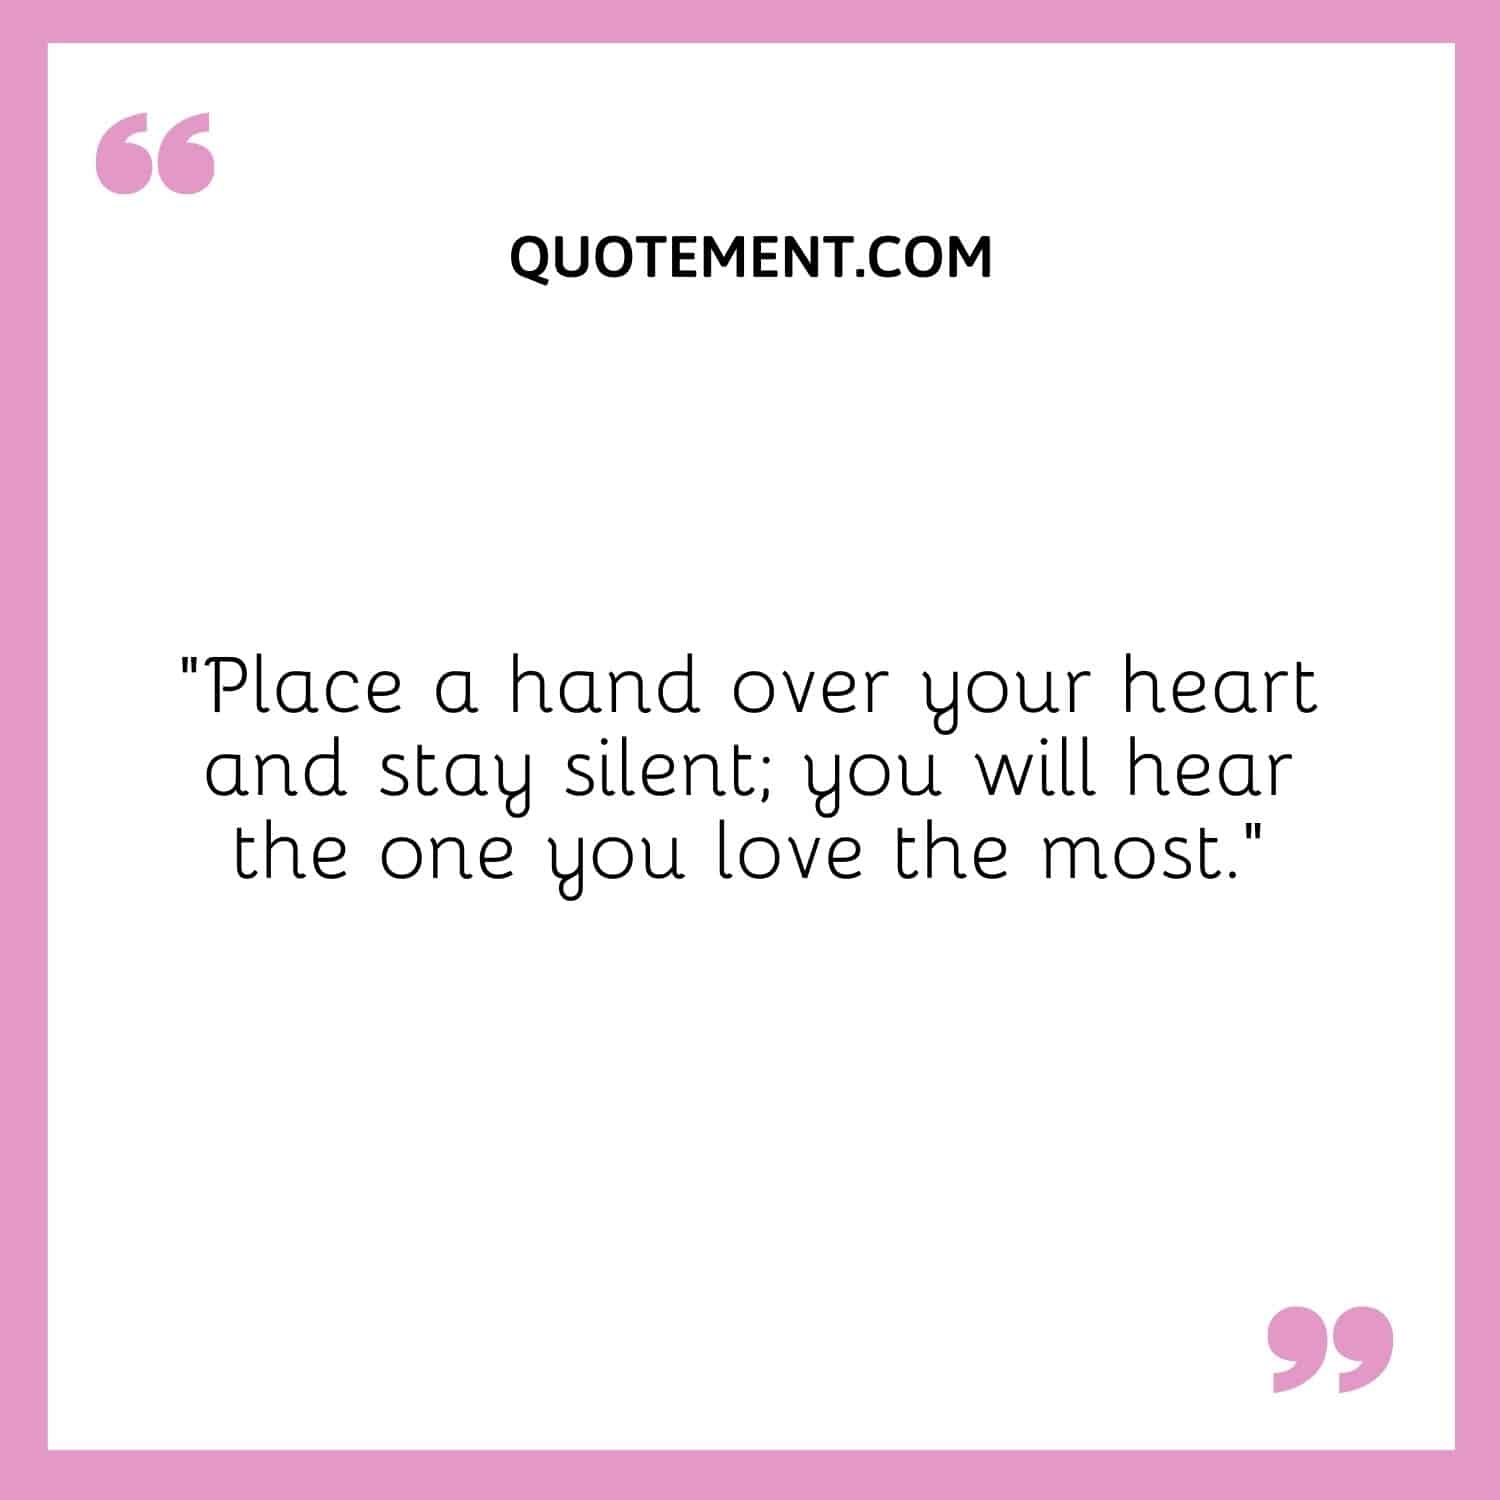 “Place a hand over your heart and stay silent; you will hear the one you love the most.”